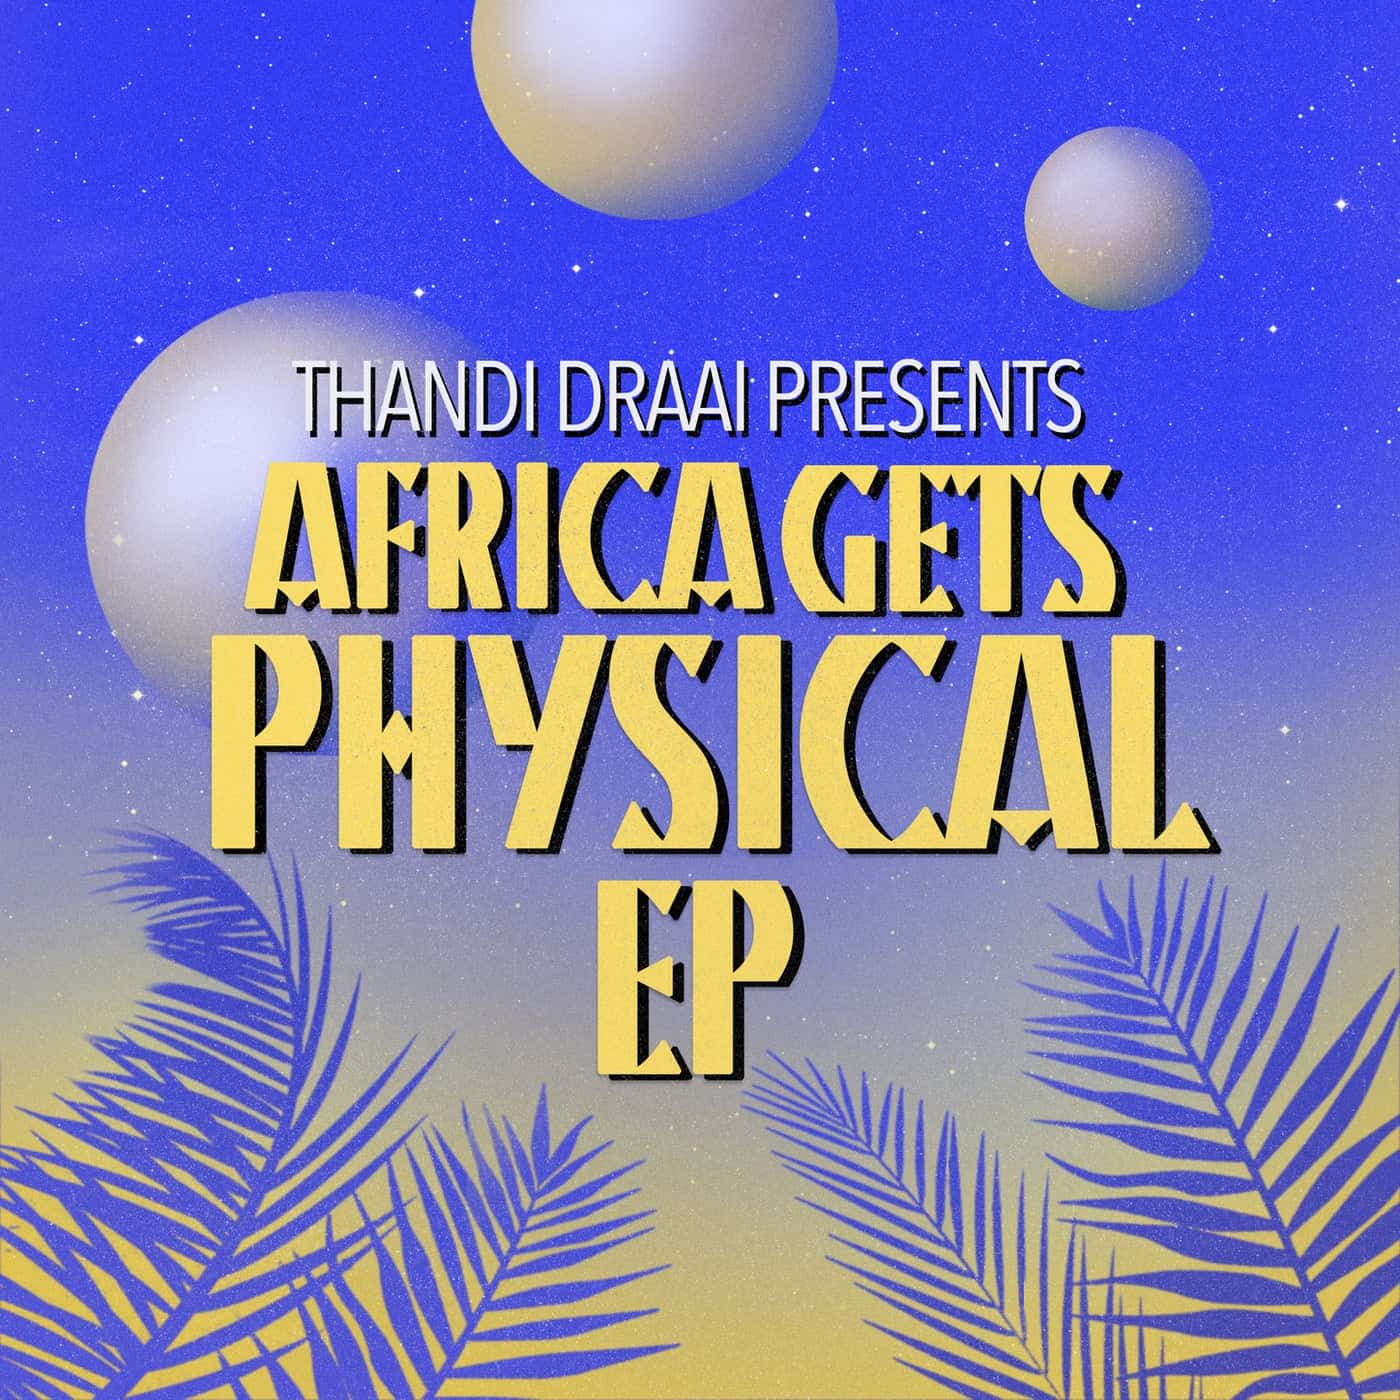 Download Africa Gets Physical, Vol. 4 EP on Electrobuzz